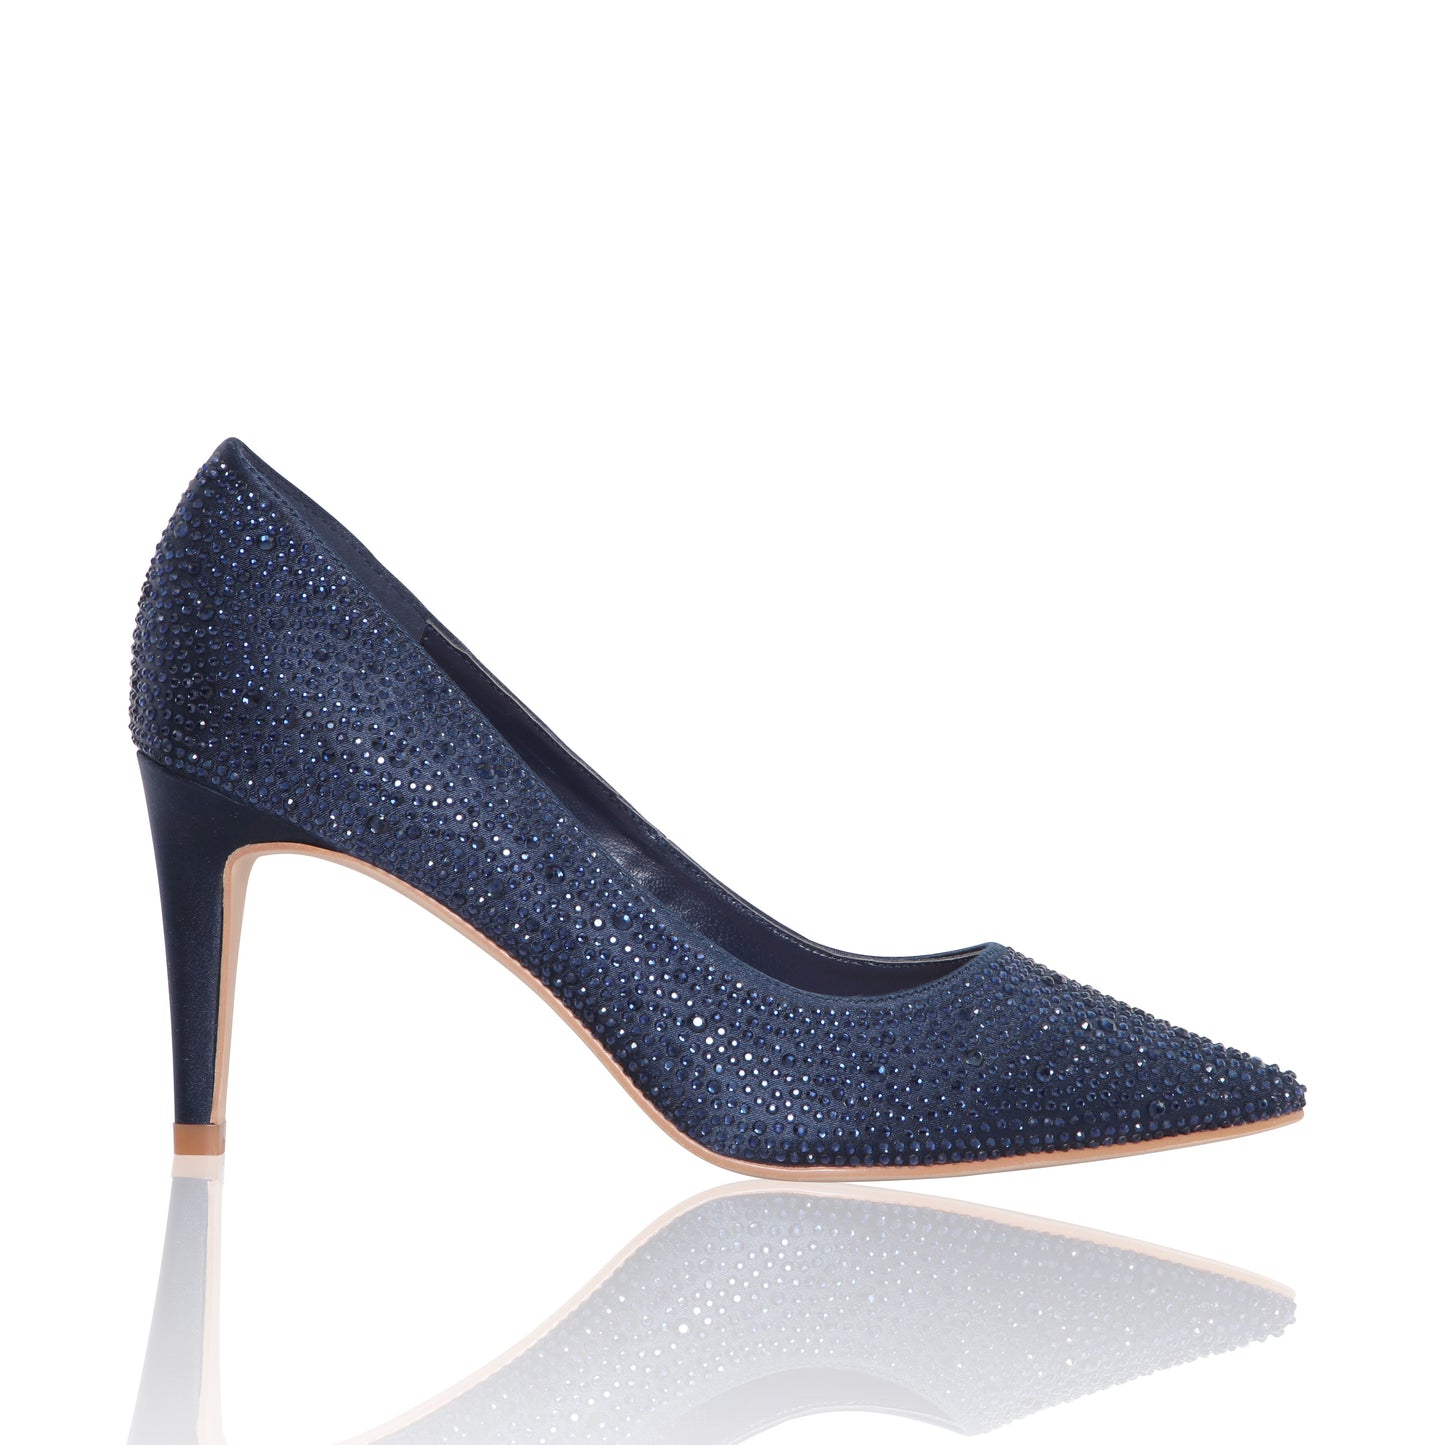 Stara navy crystal court shoes